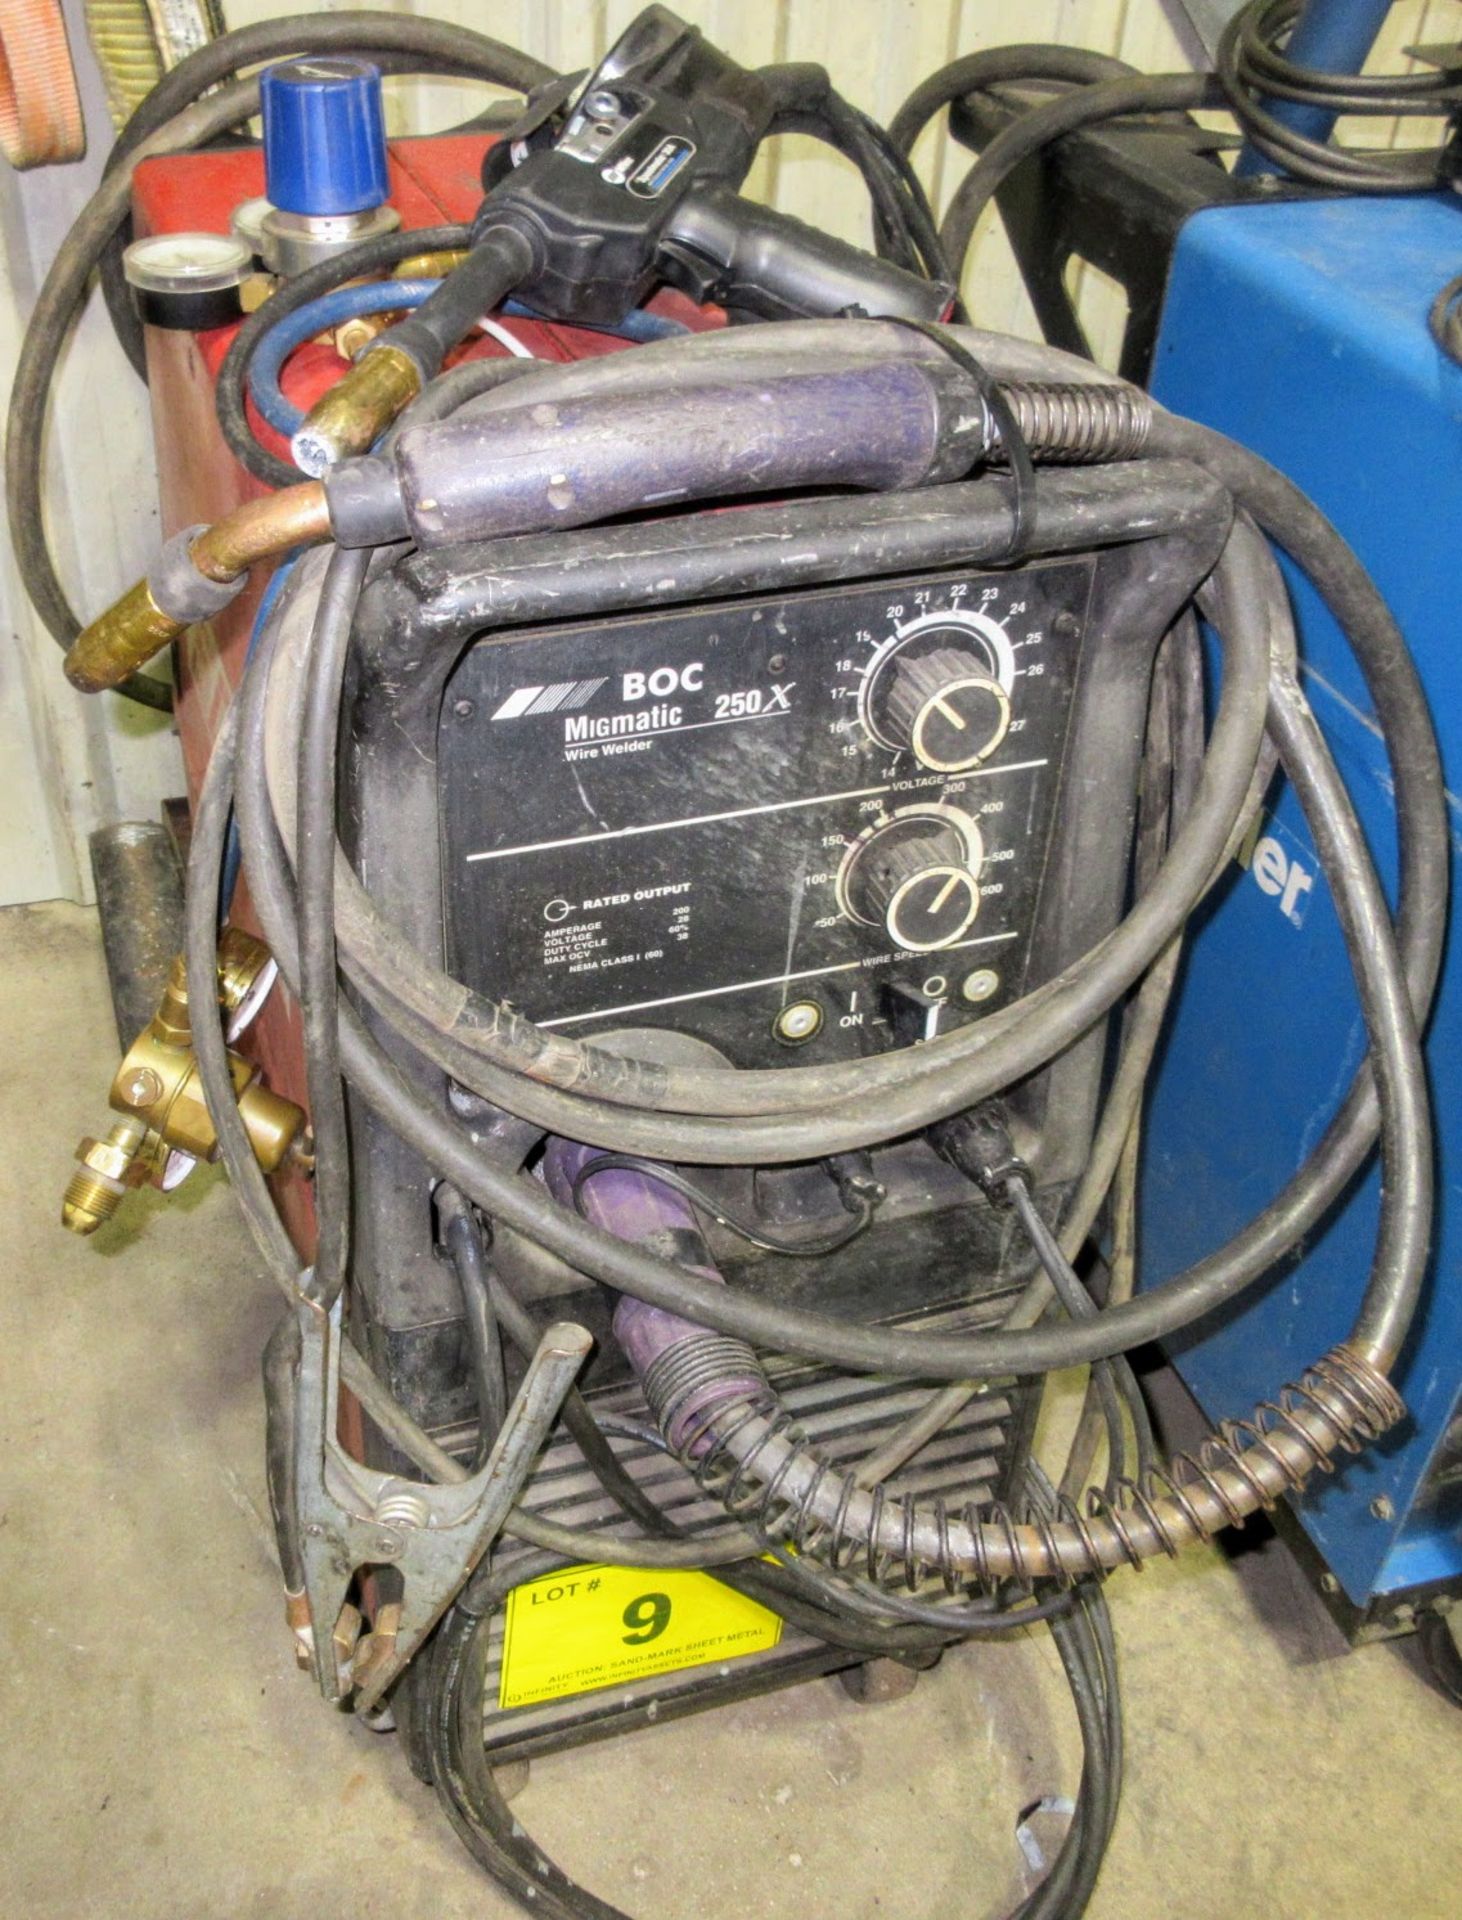 BOC MIGMATIC 250X WELDER W/ MILLER SPOOLMATIC 30A AIR COOLED SPOOL GUN, MIG TORCH, CABLES AND CART